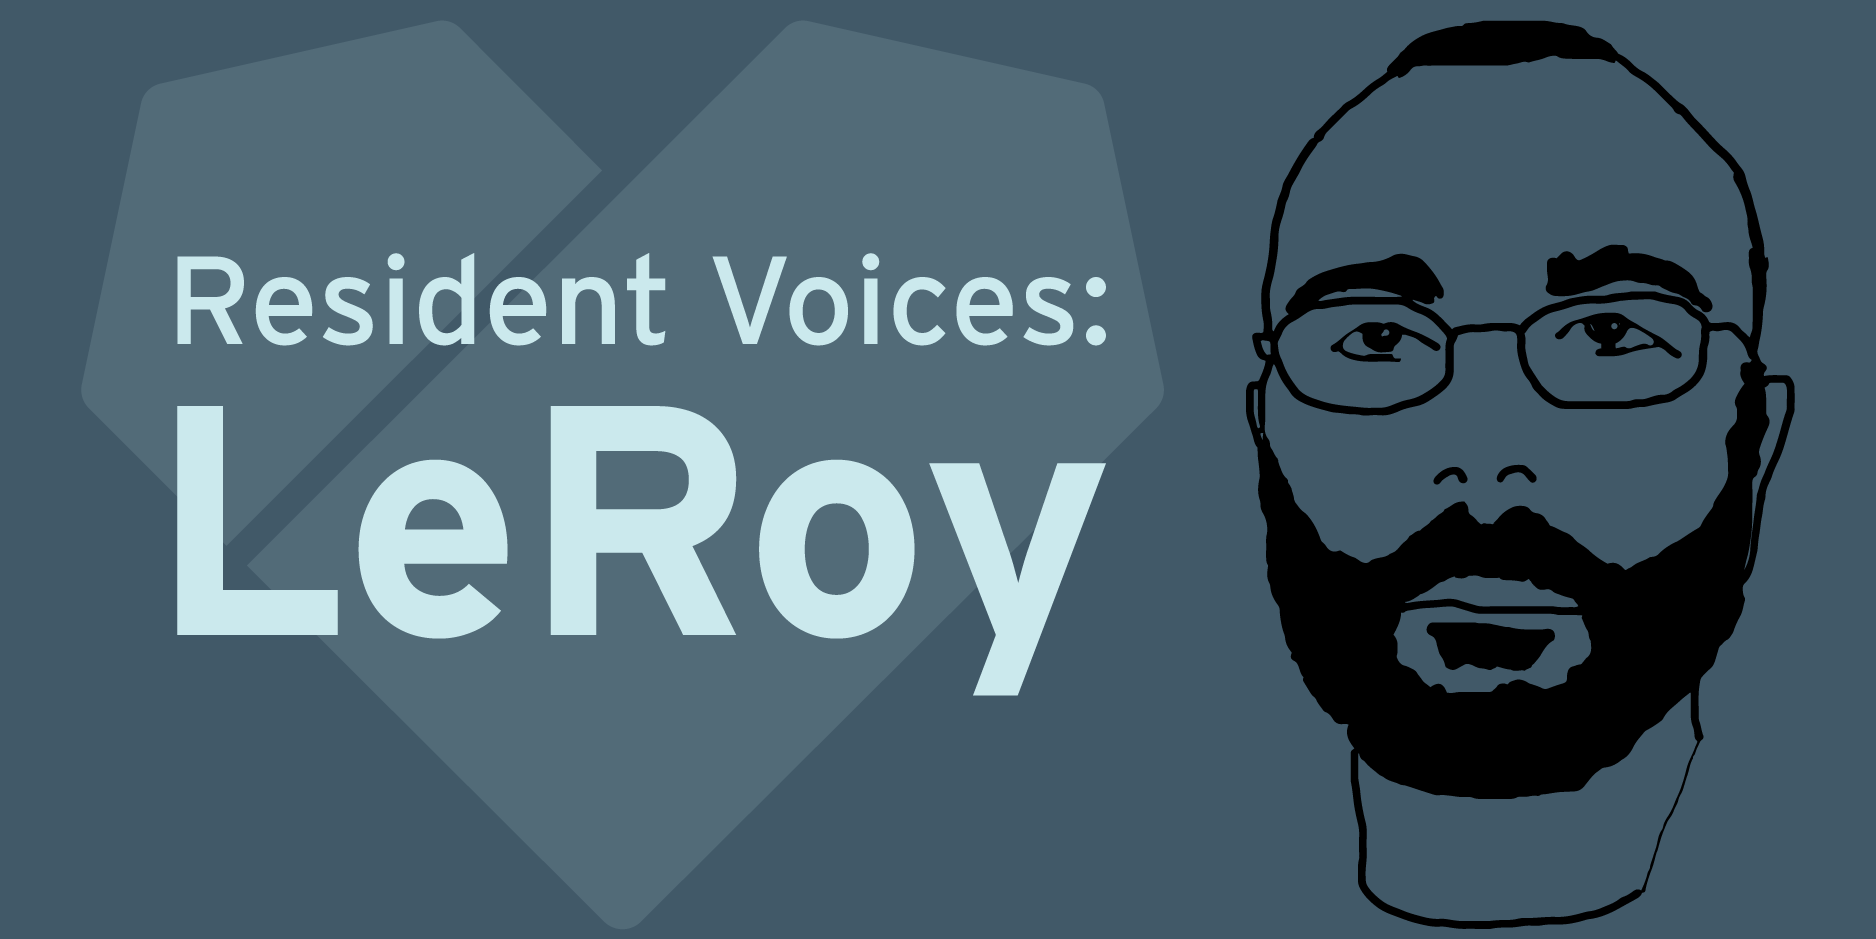 Title: Resident Voices: LeRoy, with a drawing of resident LeRoy's face.